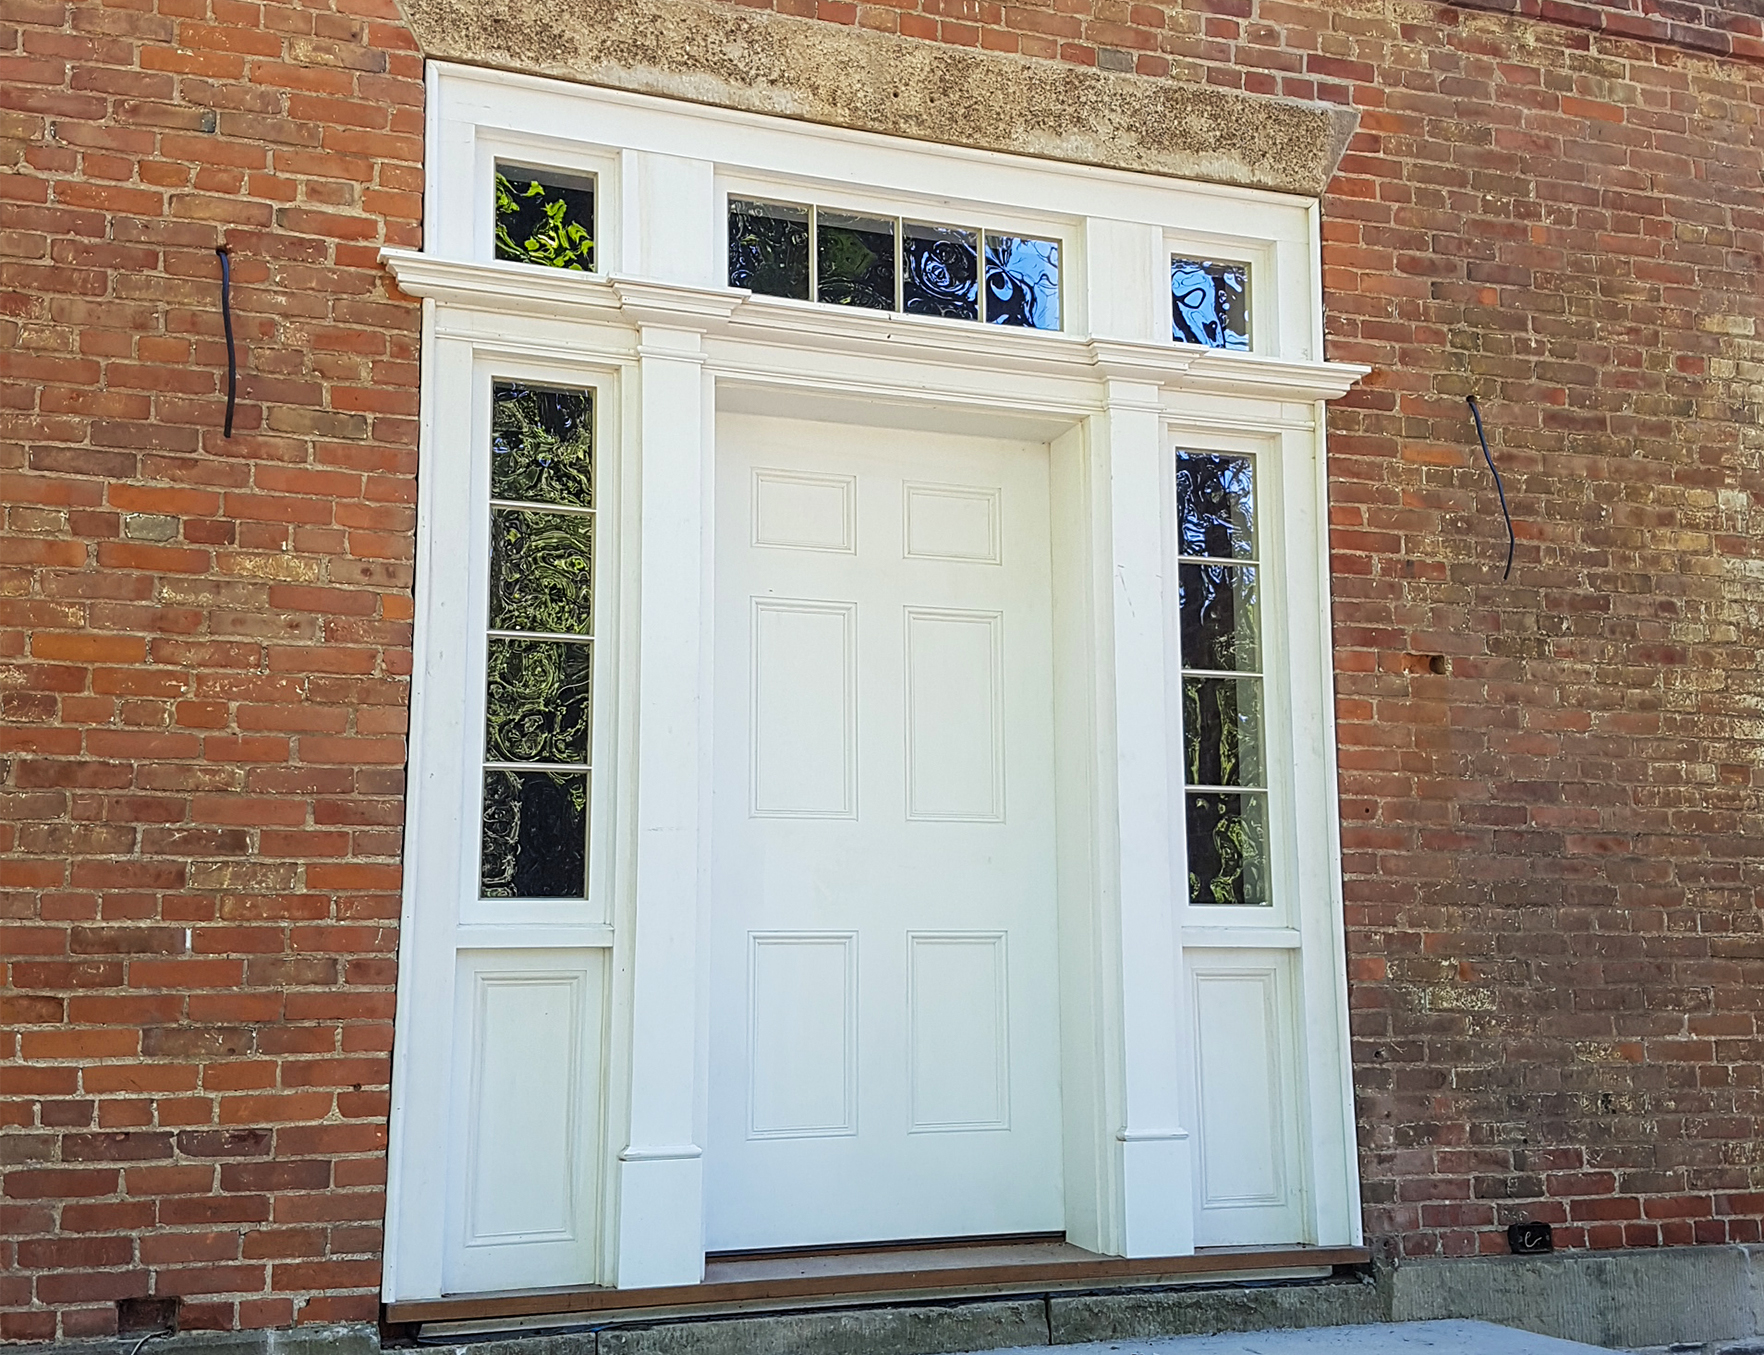 Trimmed Reproduction Regency Entry